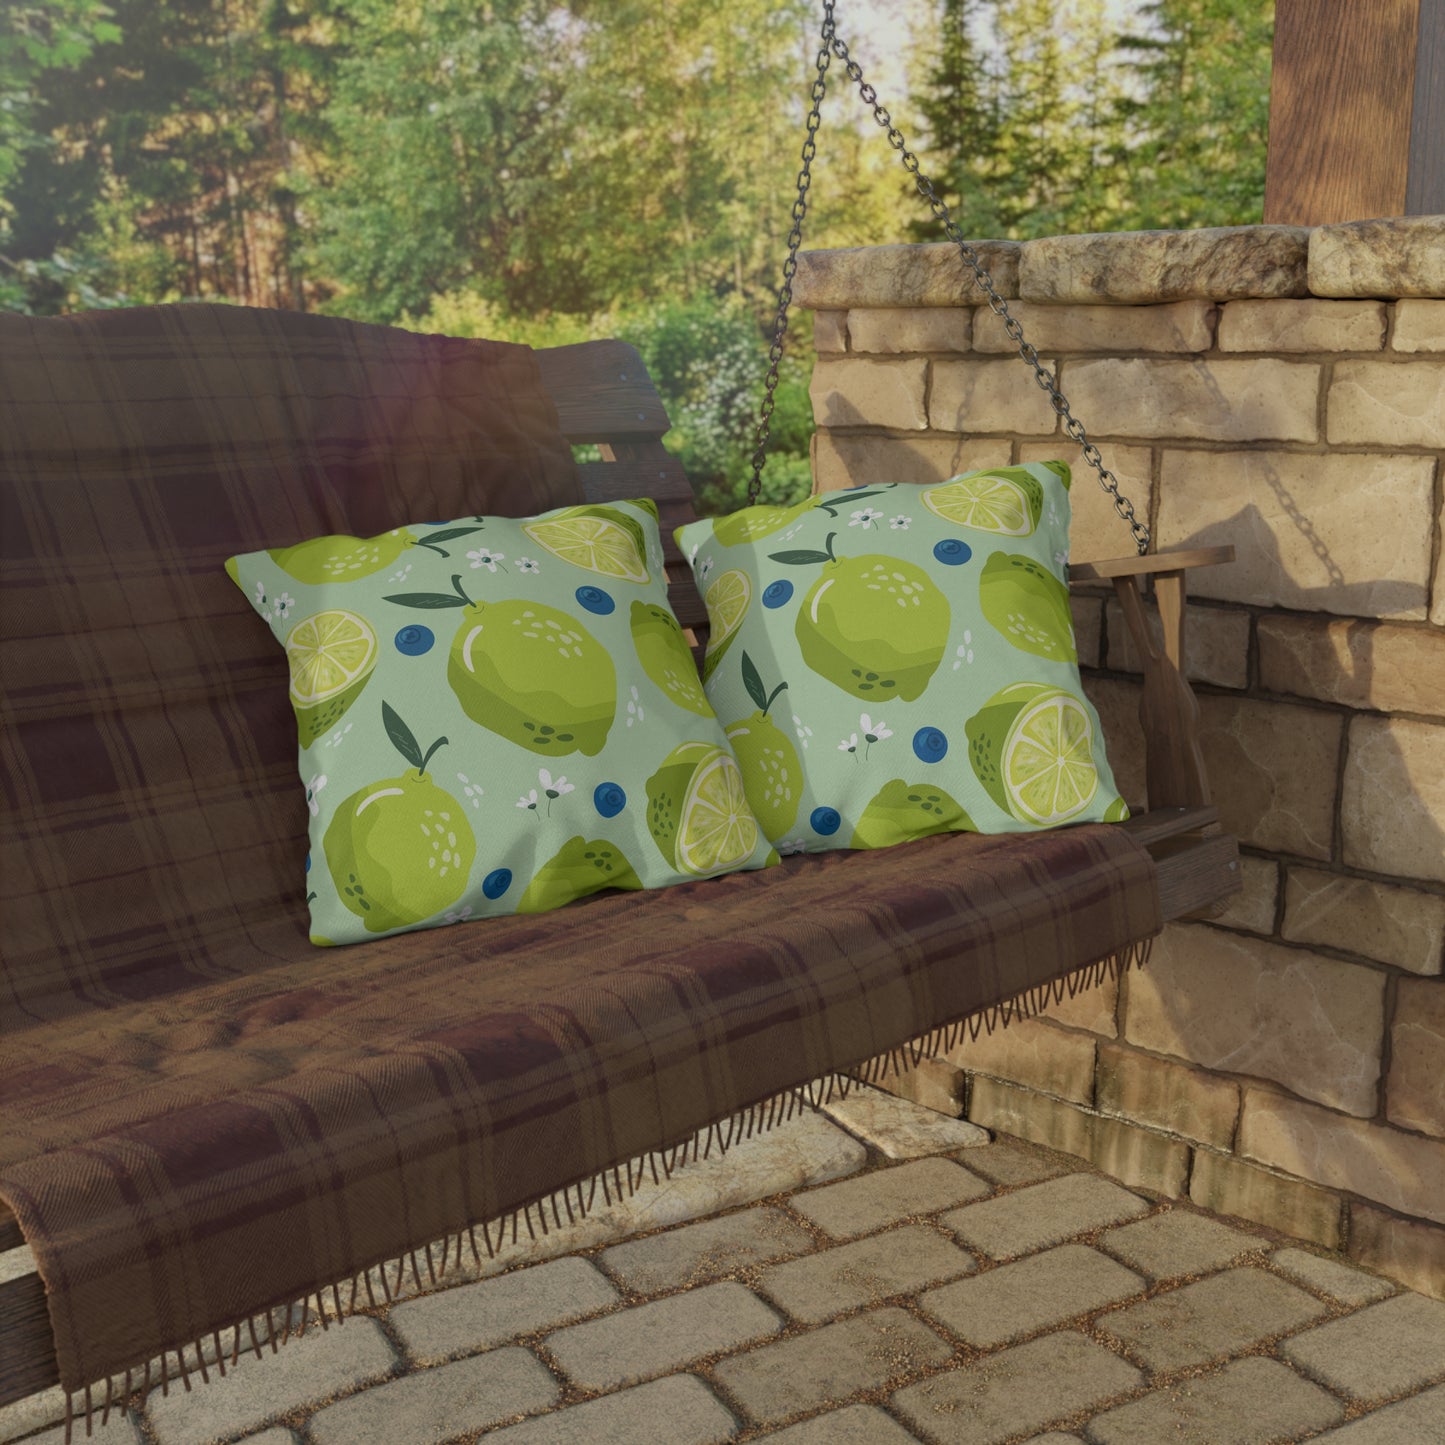 Limes and Blueberries Outdoor Pillow